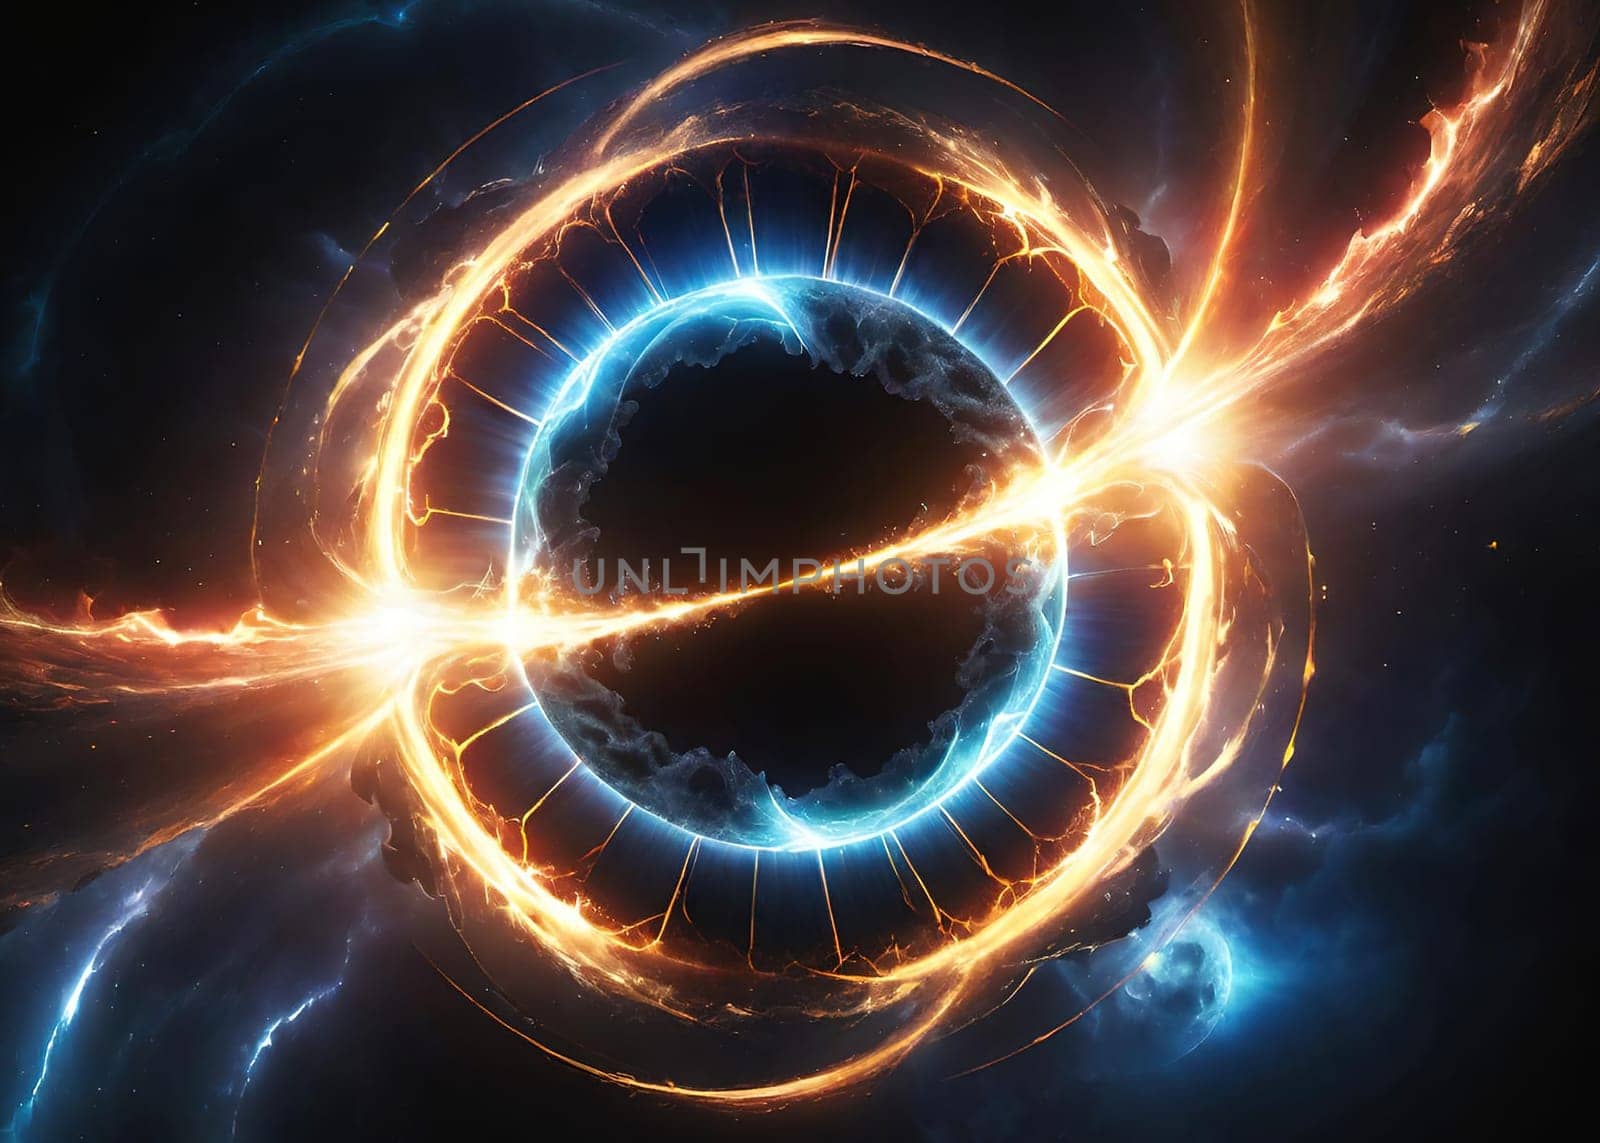 Futuristic abstract background for multiple projects such as science, music, art and technology. Circular energy explosion.Fiery circle on a dark background, computer generated abstract background.